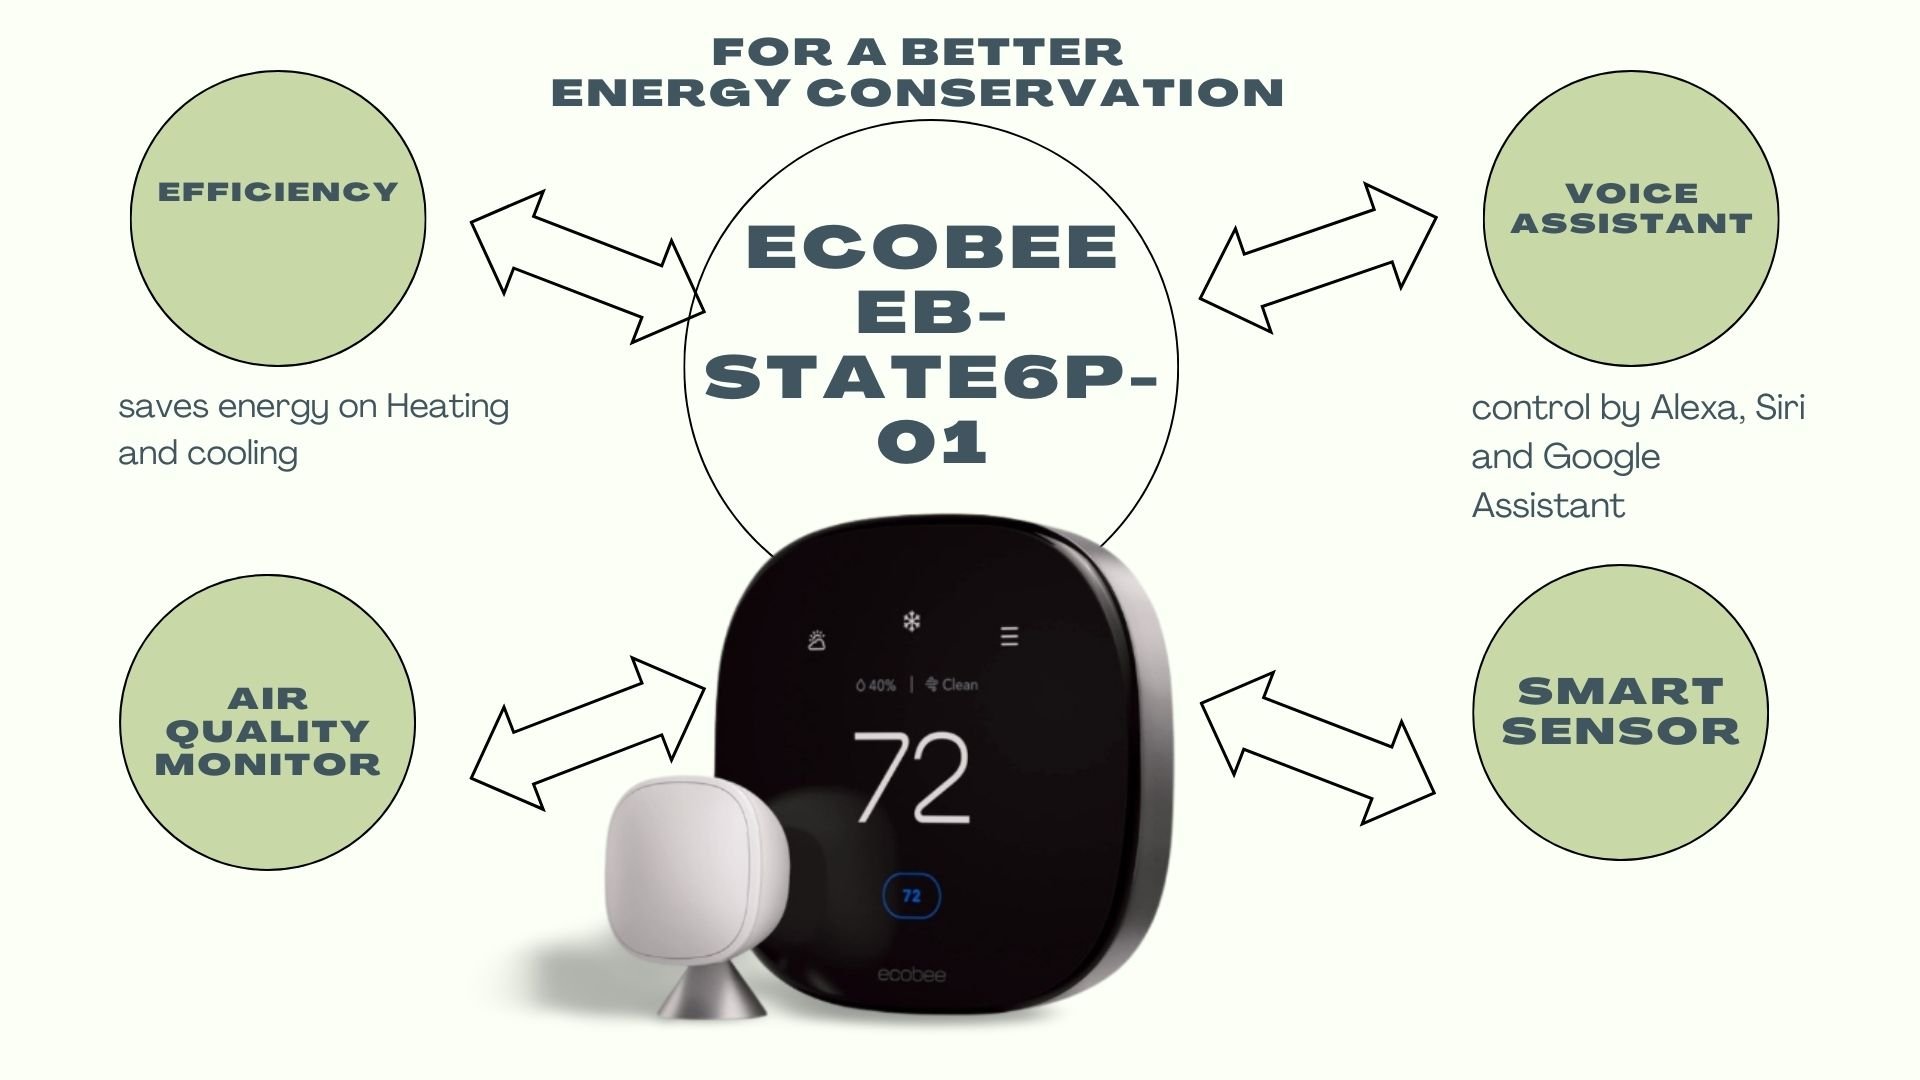 EB-State6p-01(ecobee Smart Thermostat Premium)with voice assistant